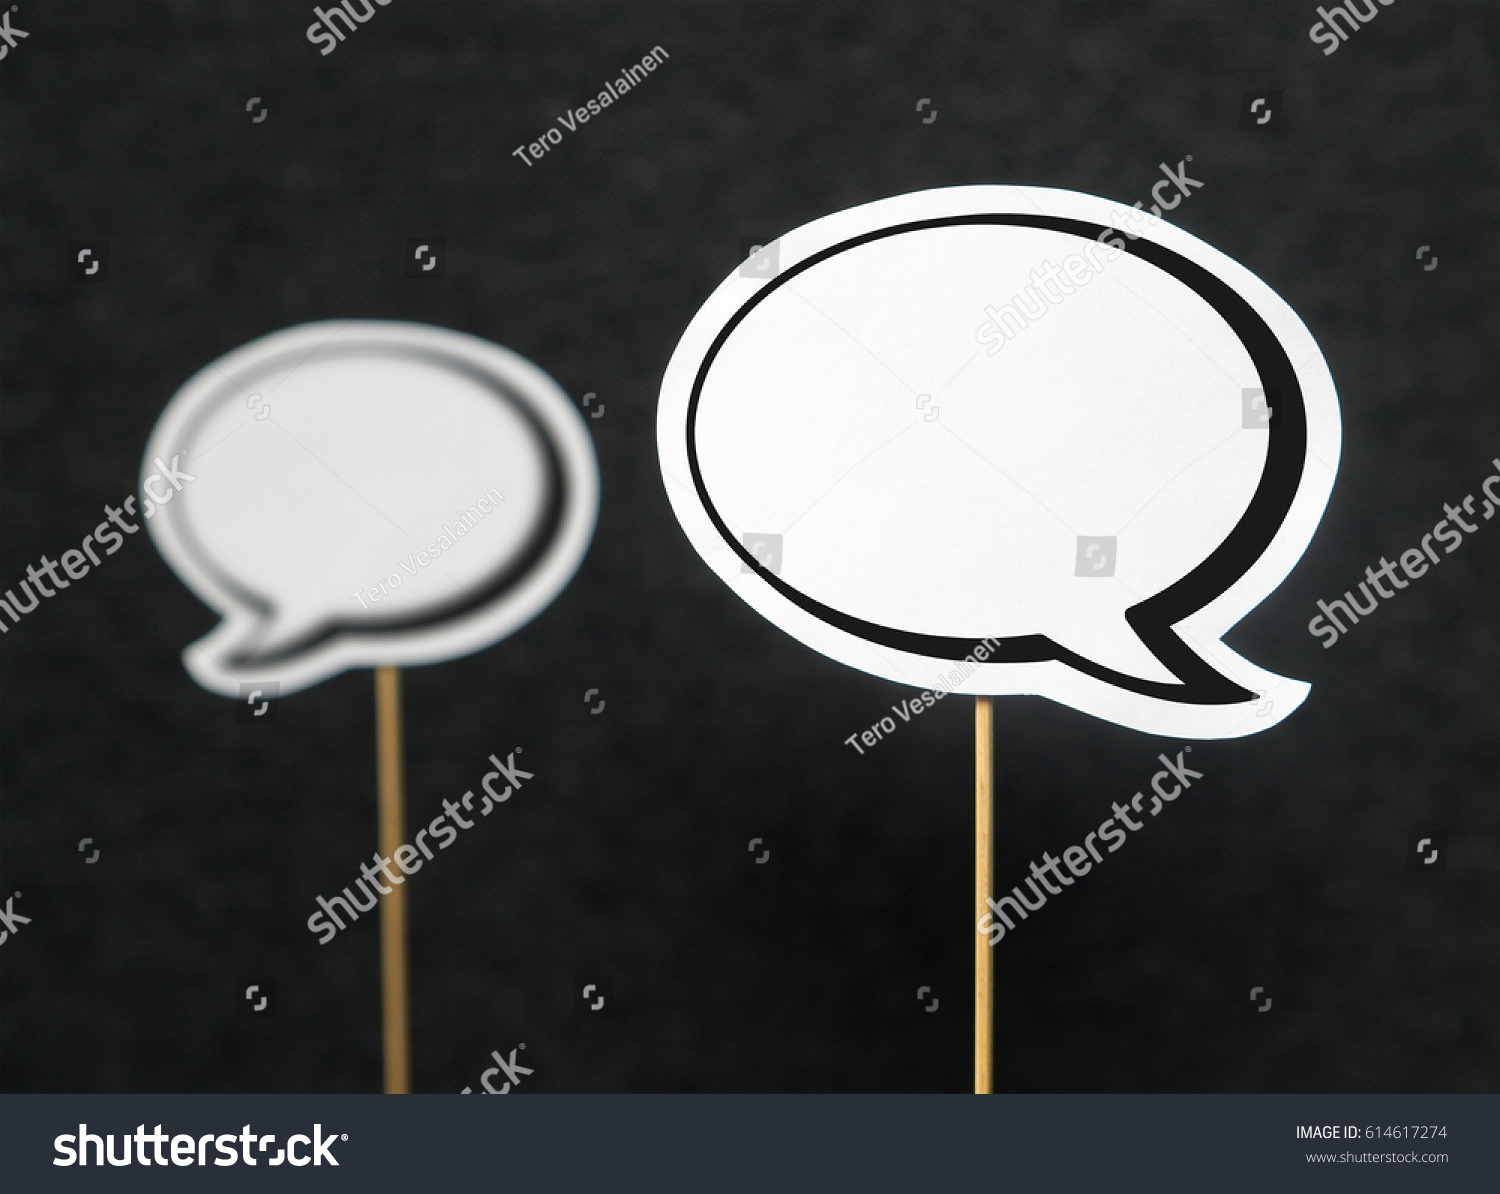 2 blank speech bubbles on a dark black background. The other speech balloon blurred. Chat bubble cut from paper with wooden stick. Discussion, protest and commenting concept with copy space for text. #614617274